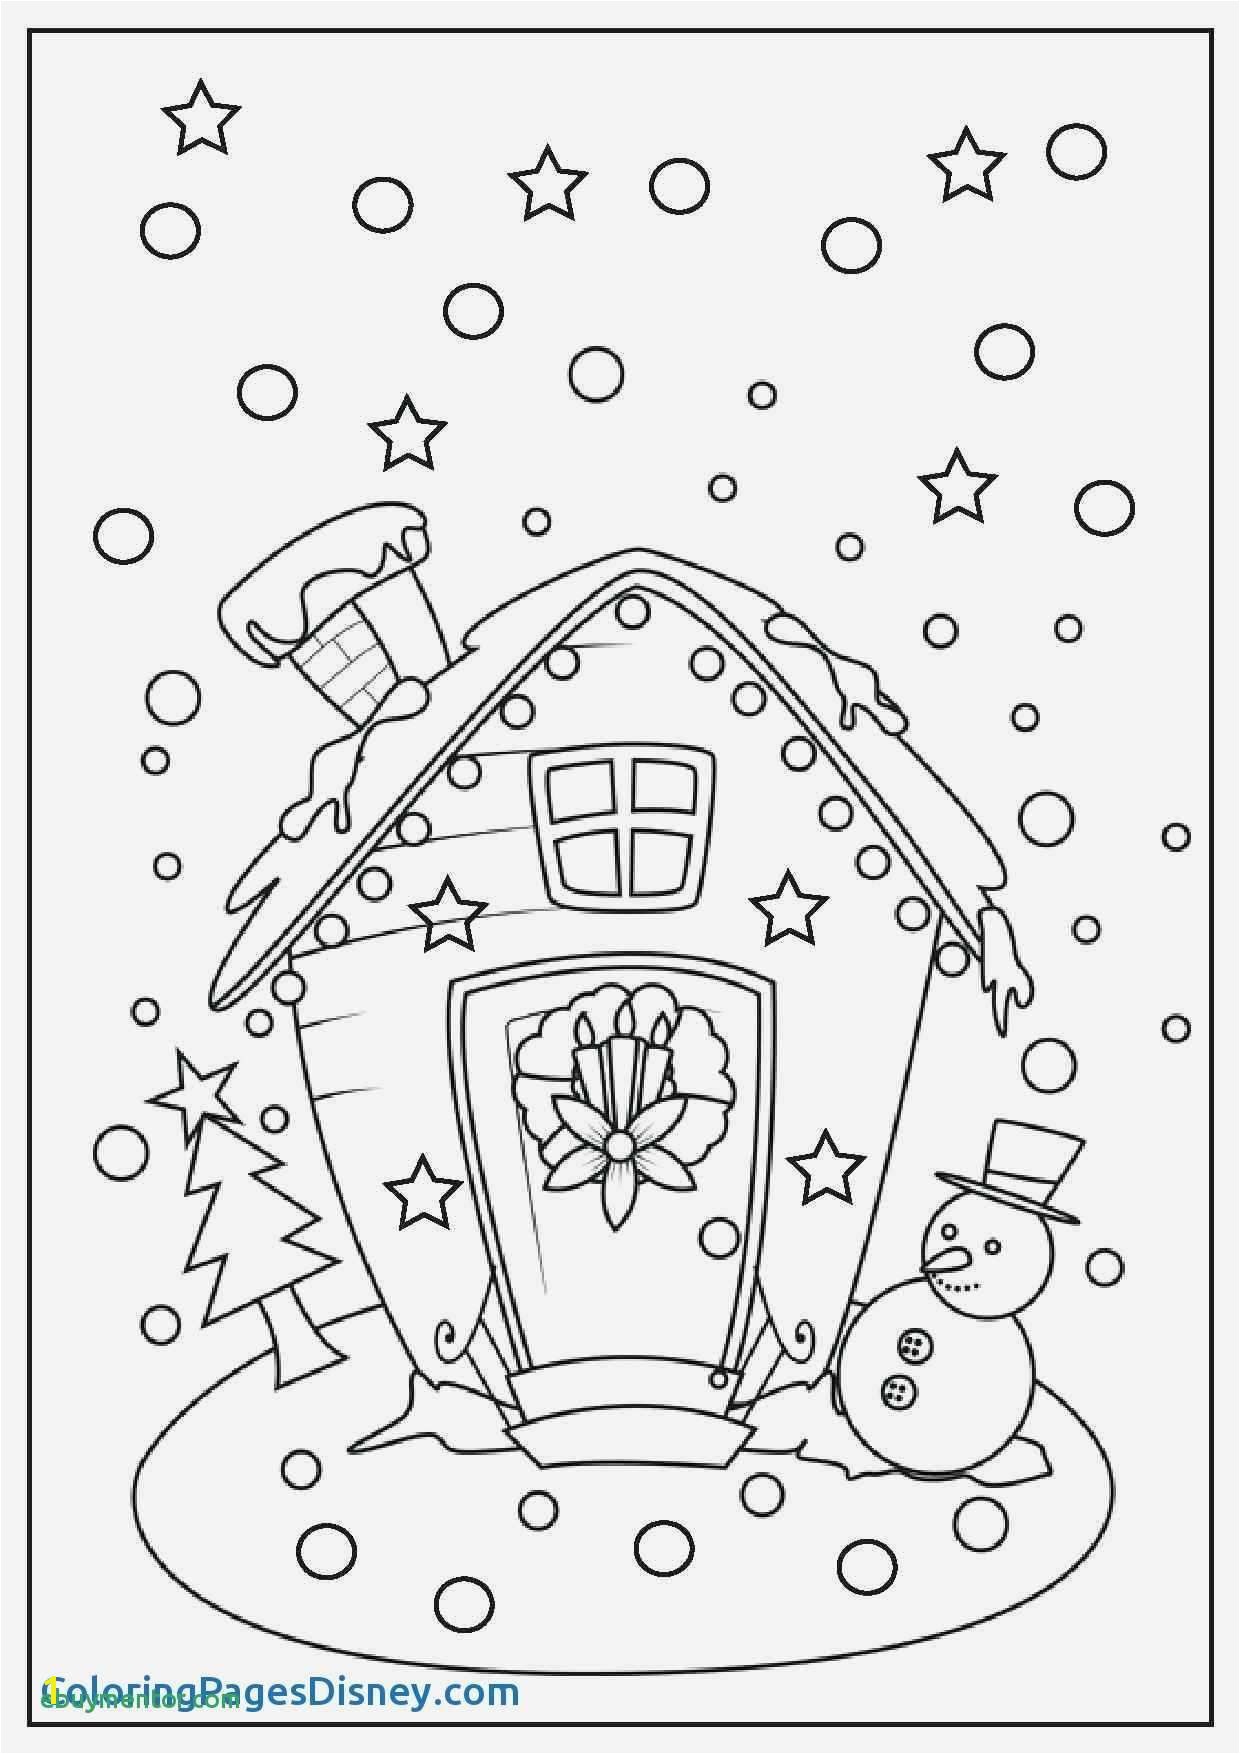 Christmas Coloring Pages Free Jesus Christmas Coloring Pages Free N Fun Cool Coloring Printables 0d